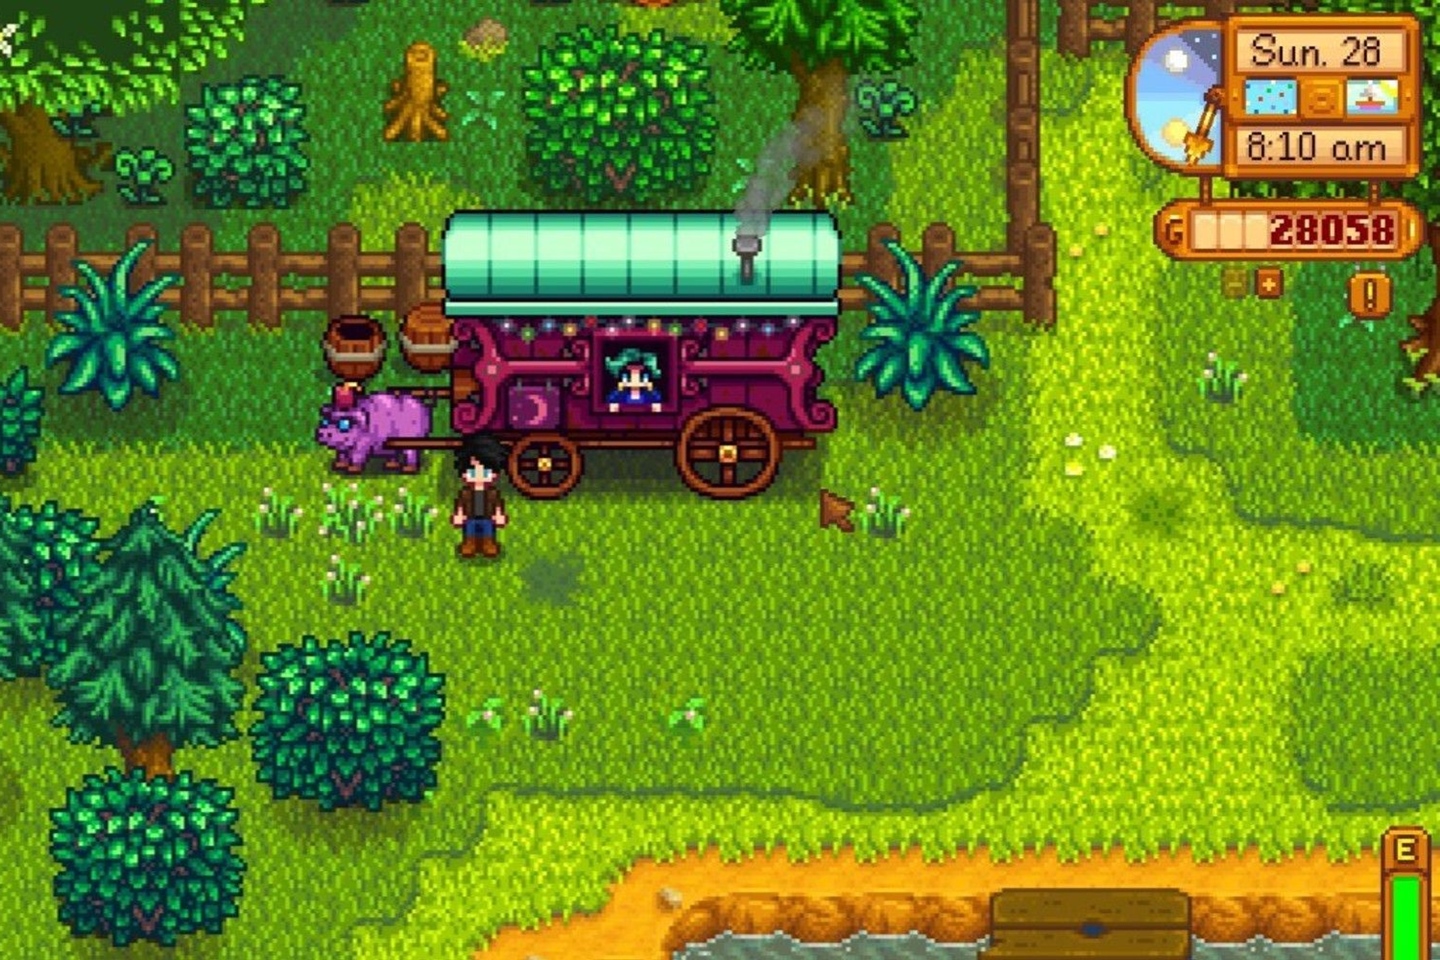 Travel Cart where you can buy the Wedding Ring recipe in Stardew Valley.